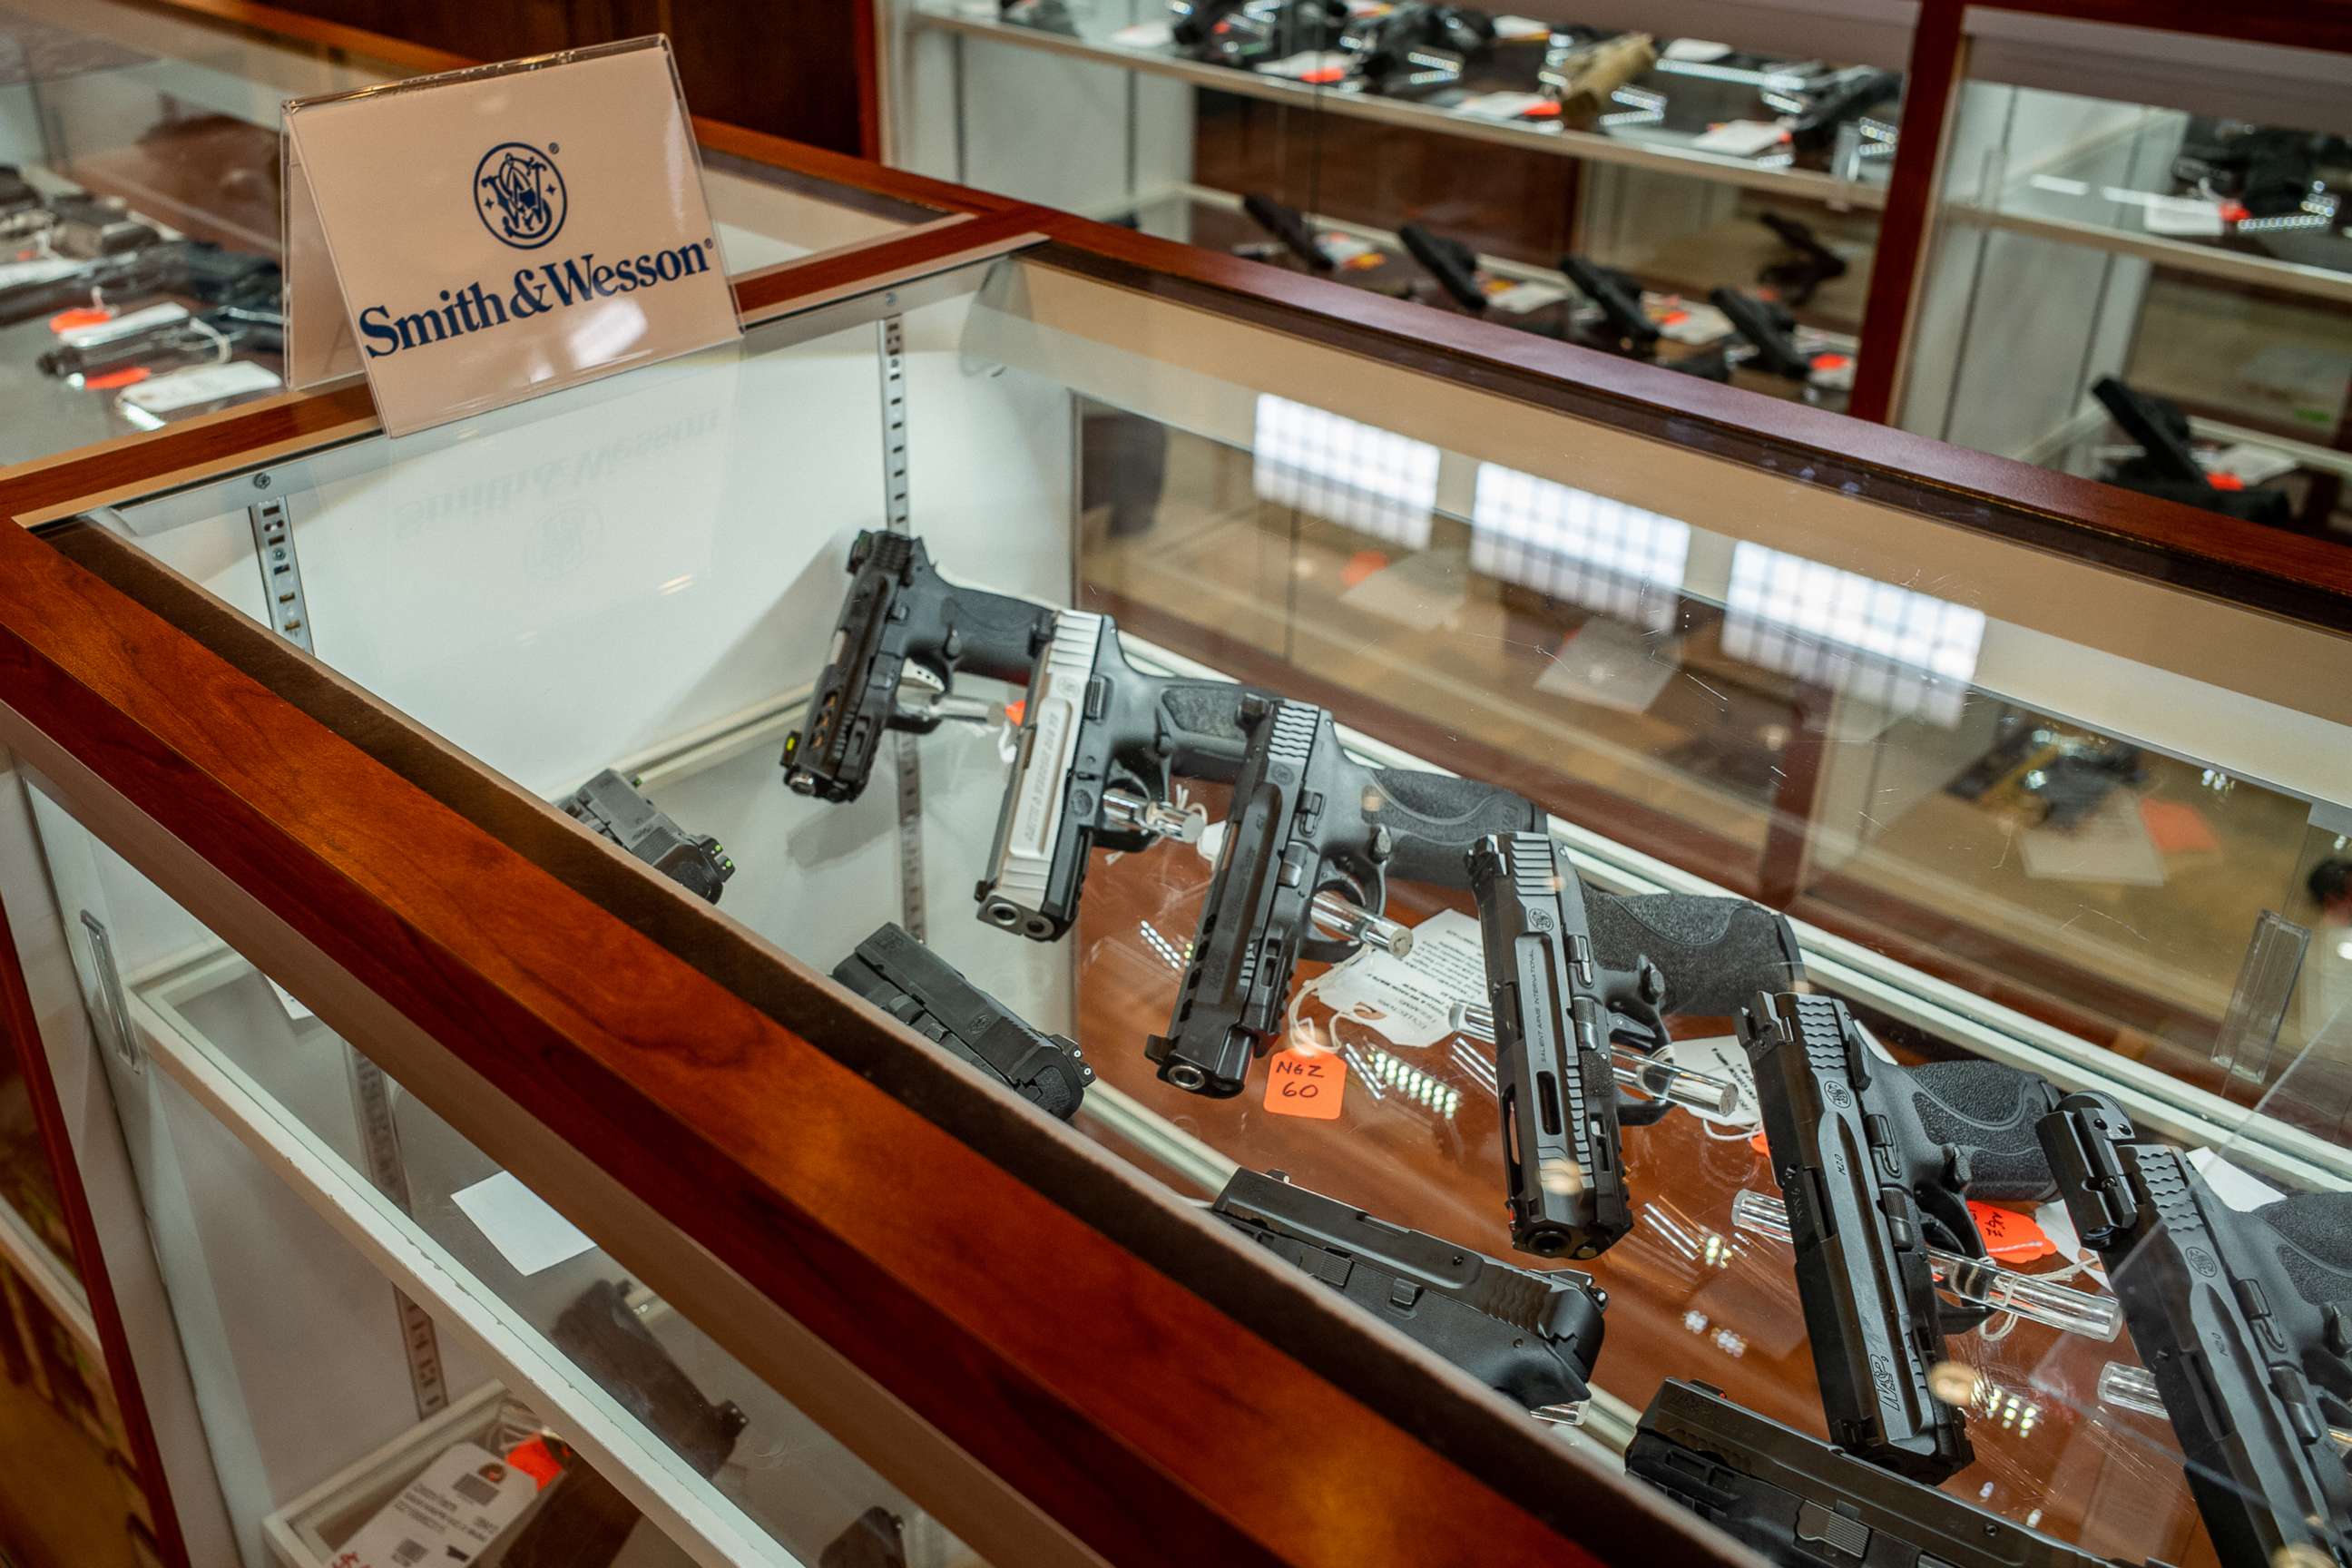 PHOTO: In this Sept. 9, 2022, file photo, Smith & Wesson handguns are seen for sale in a gun store in Houston, Texas.